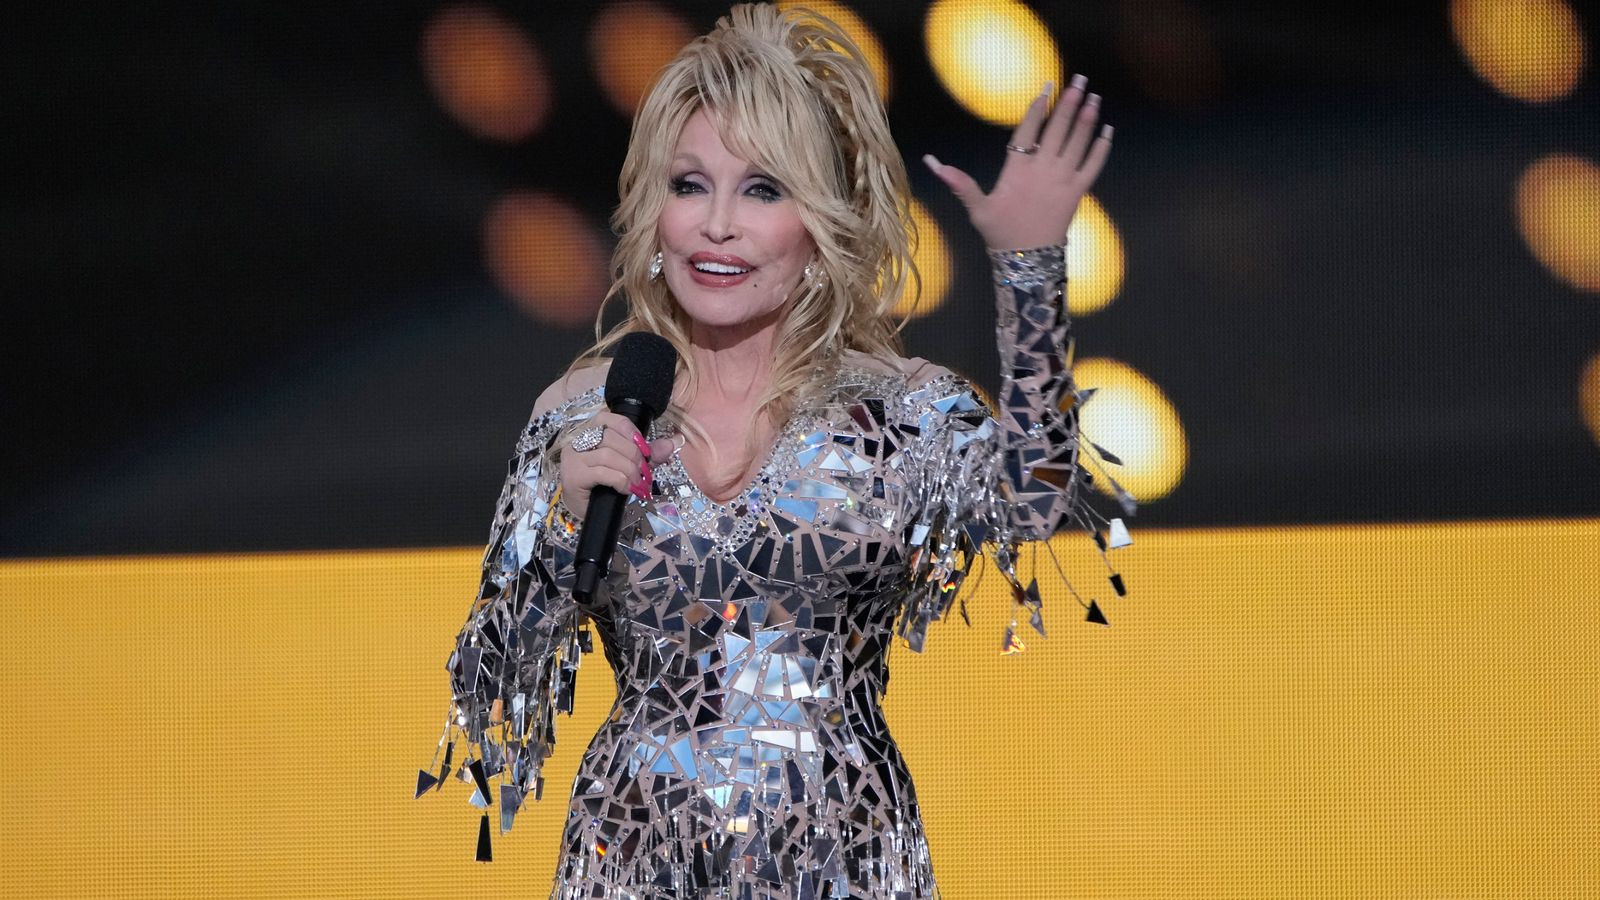 Country Music Legend, Dolly Parton Withdraws From Race To Be Inducted Into Rock & Roll Hall Of Fame